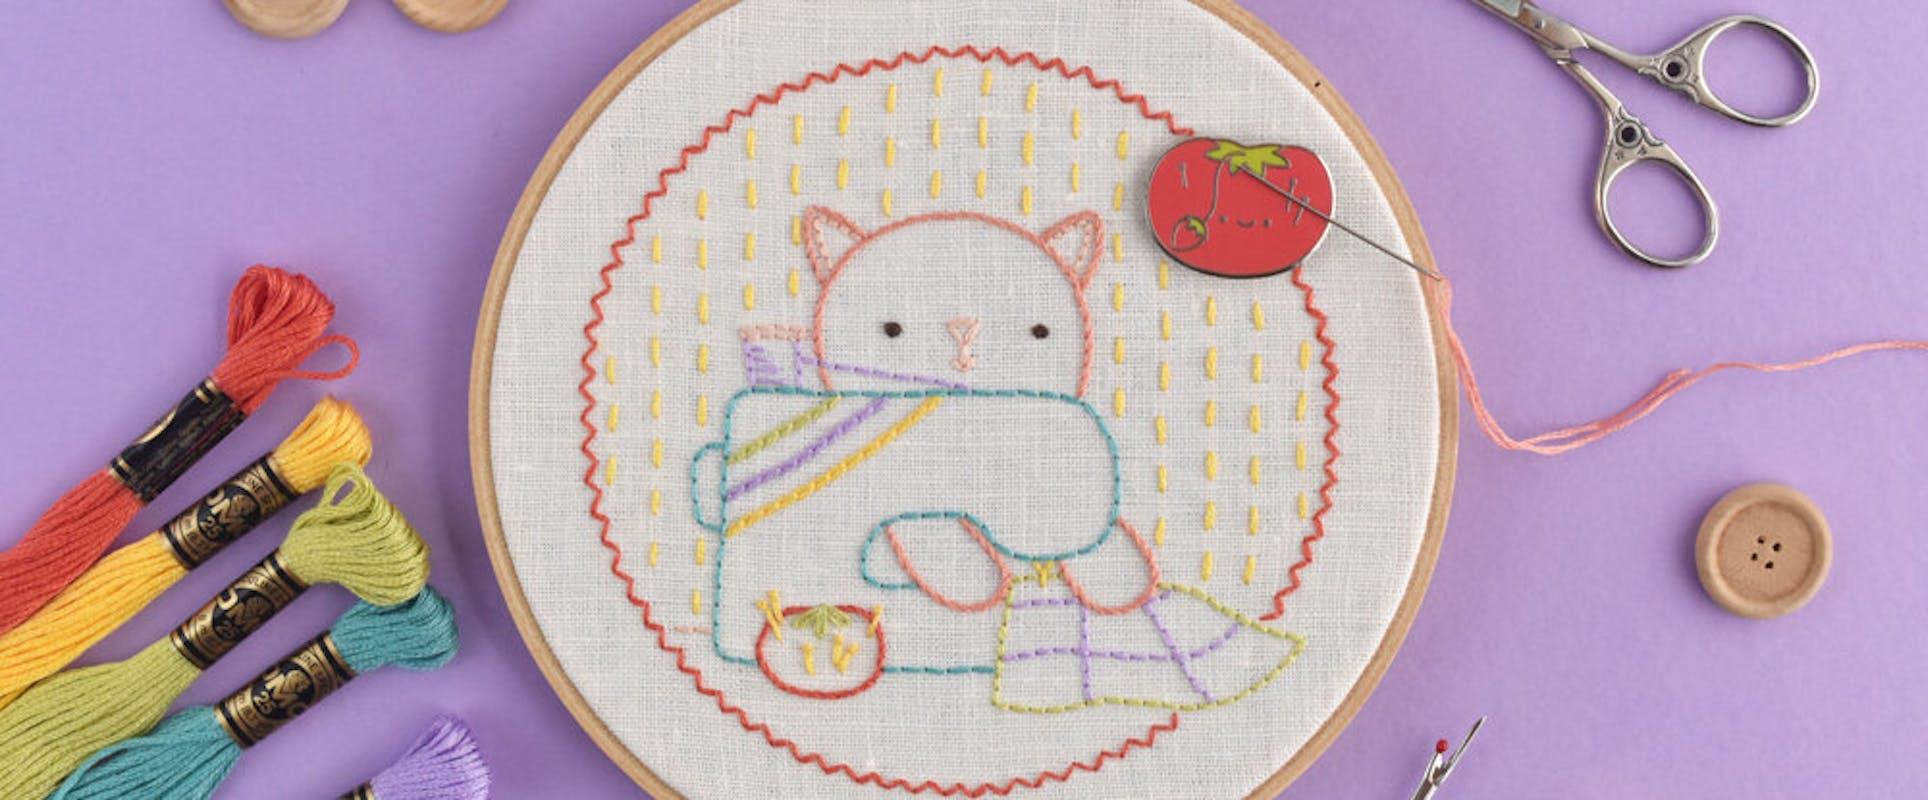 Rose Embroidery: A New Project That'll Make Your Day